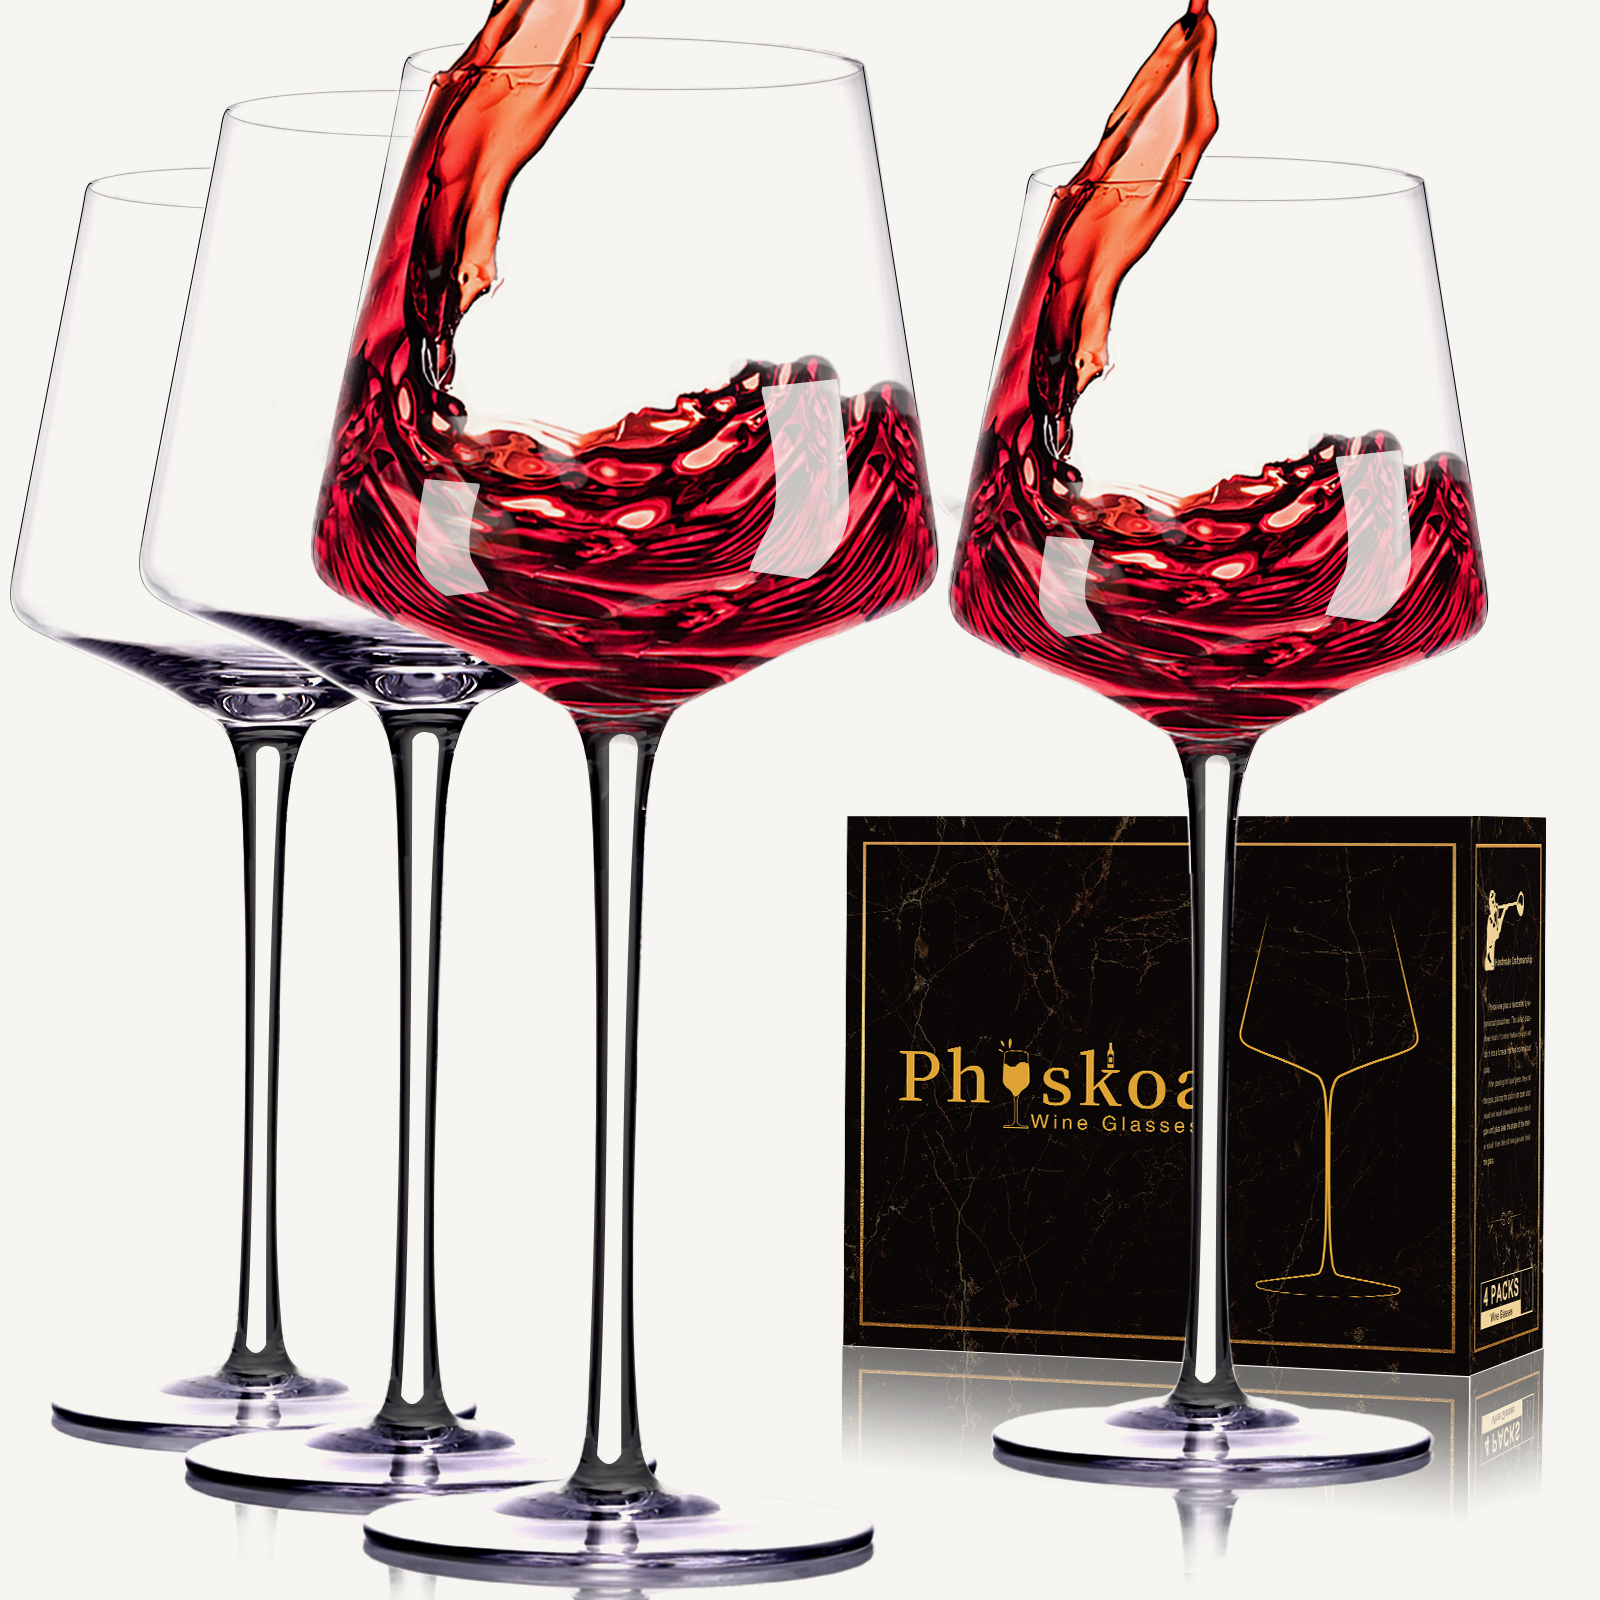 Physkoa Red/White Wine Glasses Set of 6 – 16oz Clear – Hand Blown Crystal Wine Glasses – Tall Long Stem Modern Wine Glasses – Unique Square Wine